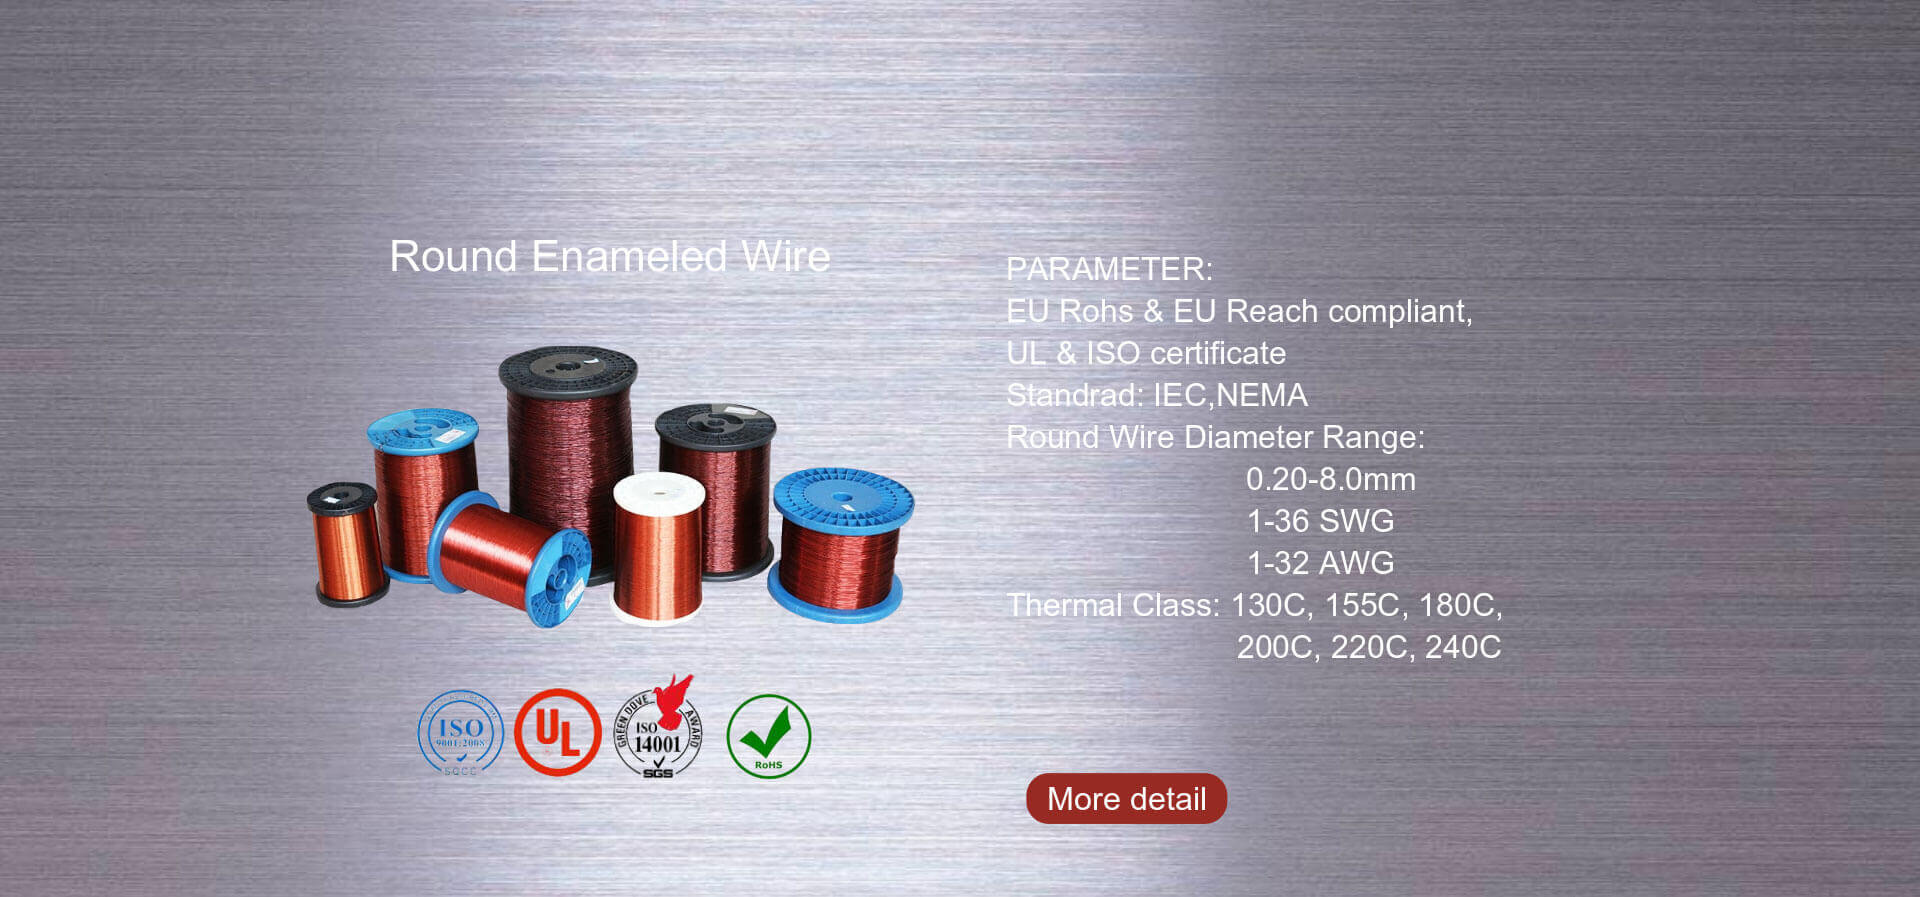 Round Enameled Wire